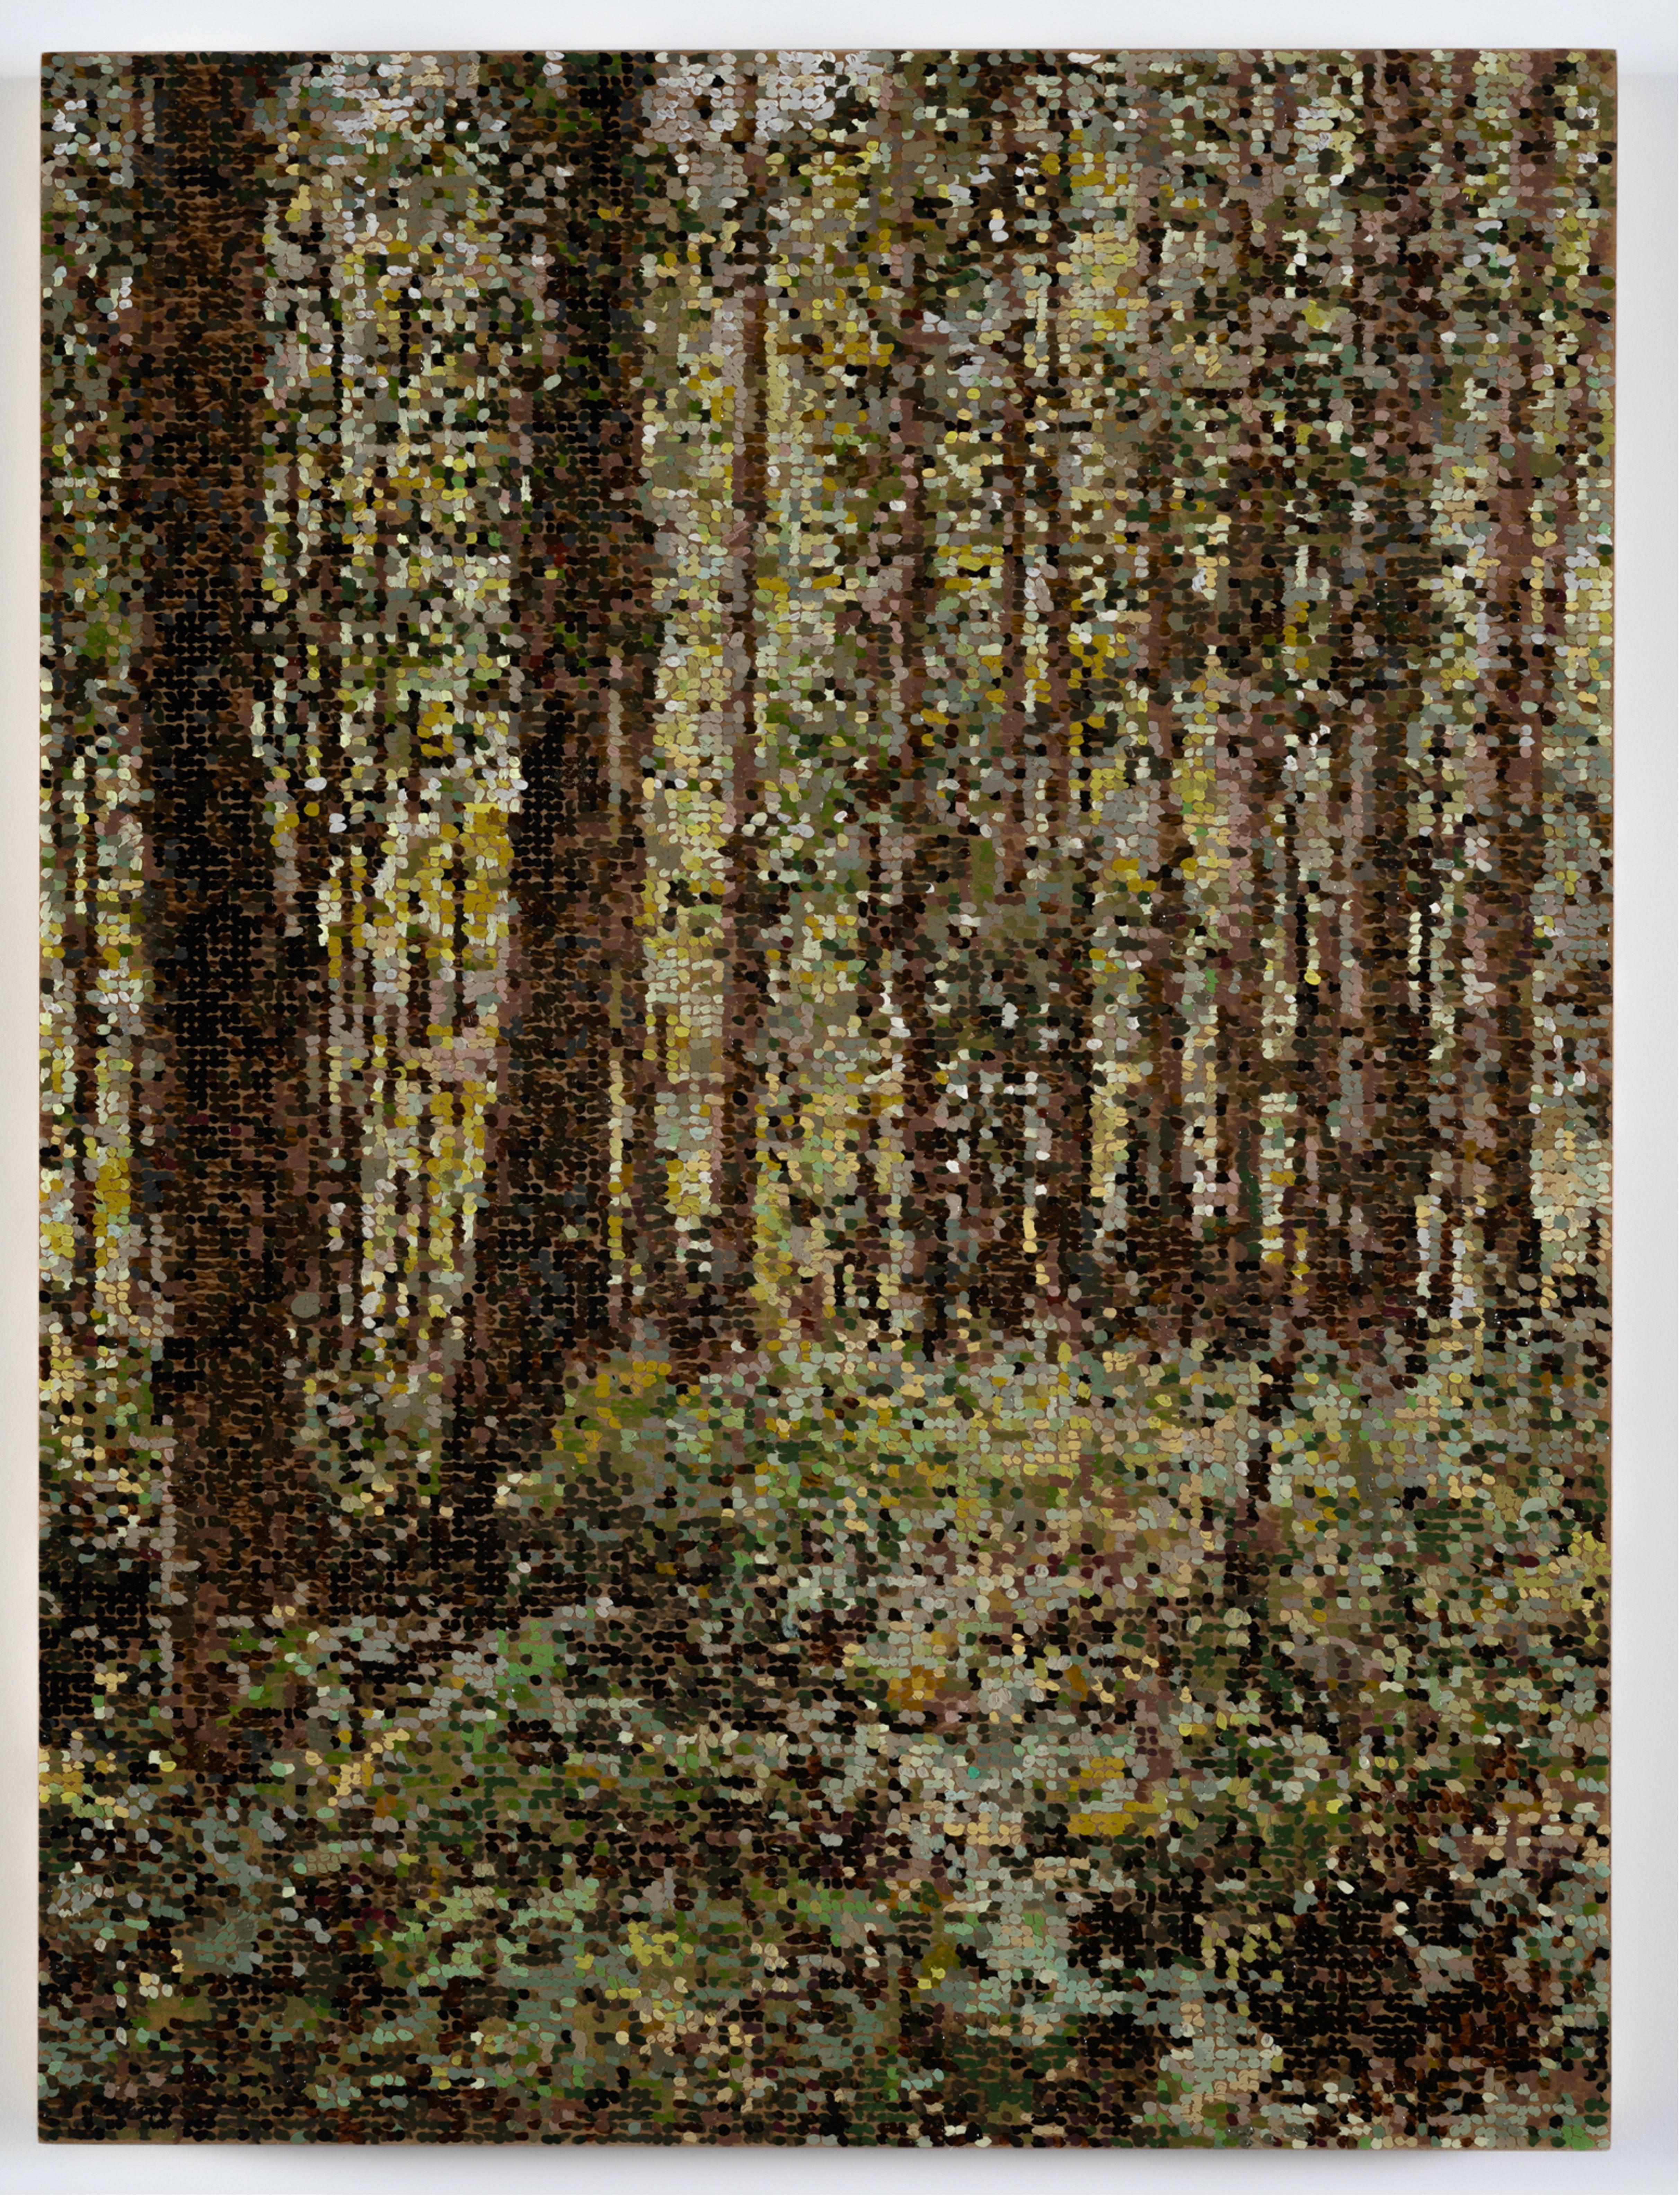 Kirstin Lamb Landscape Painting - Dappled Forest, Pointillist Forest Landscape, Green Leaves, Brown Trees, Woods